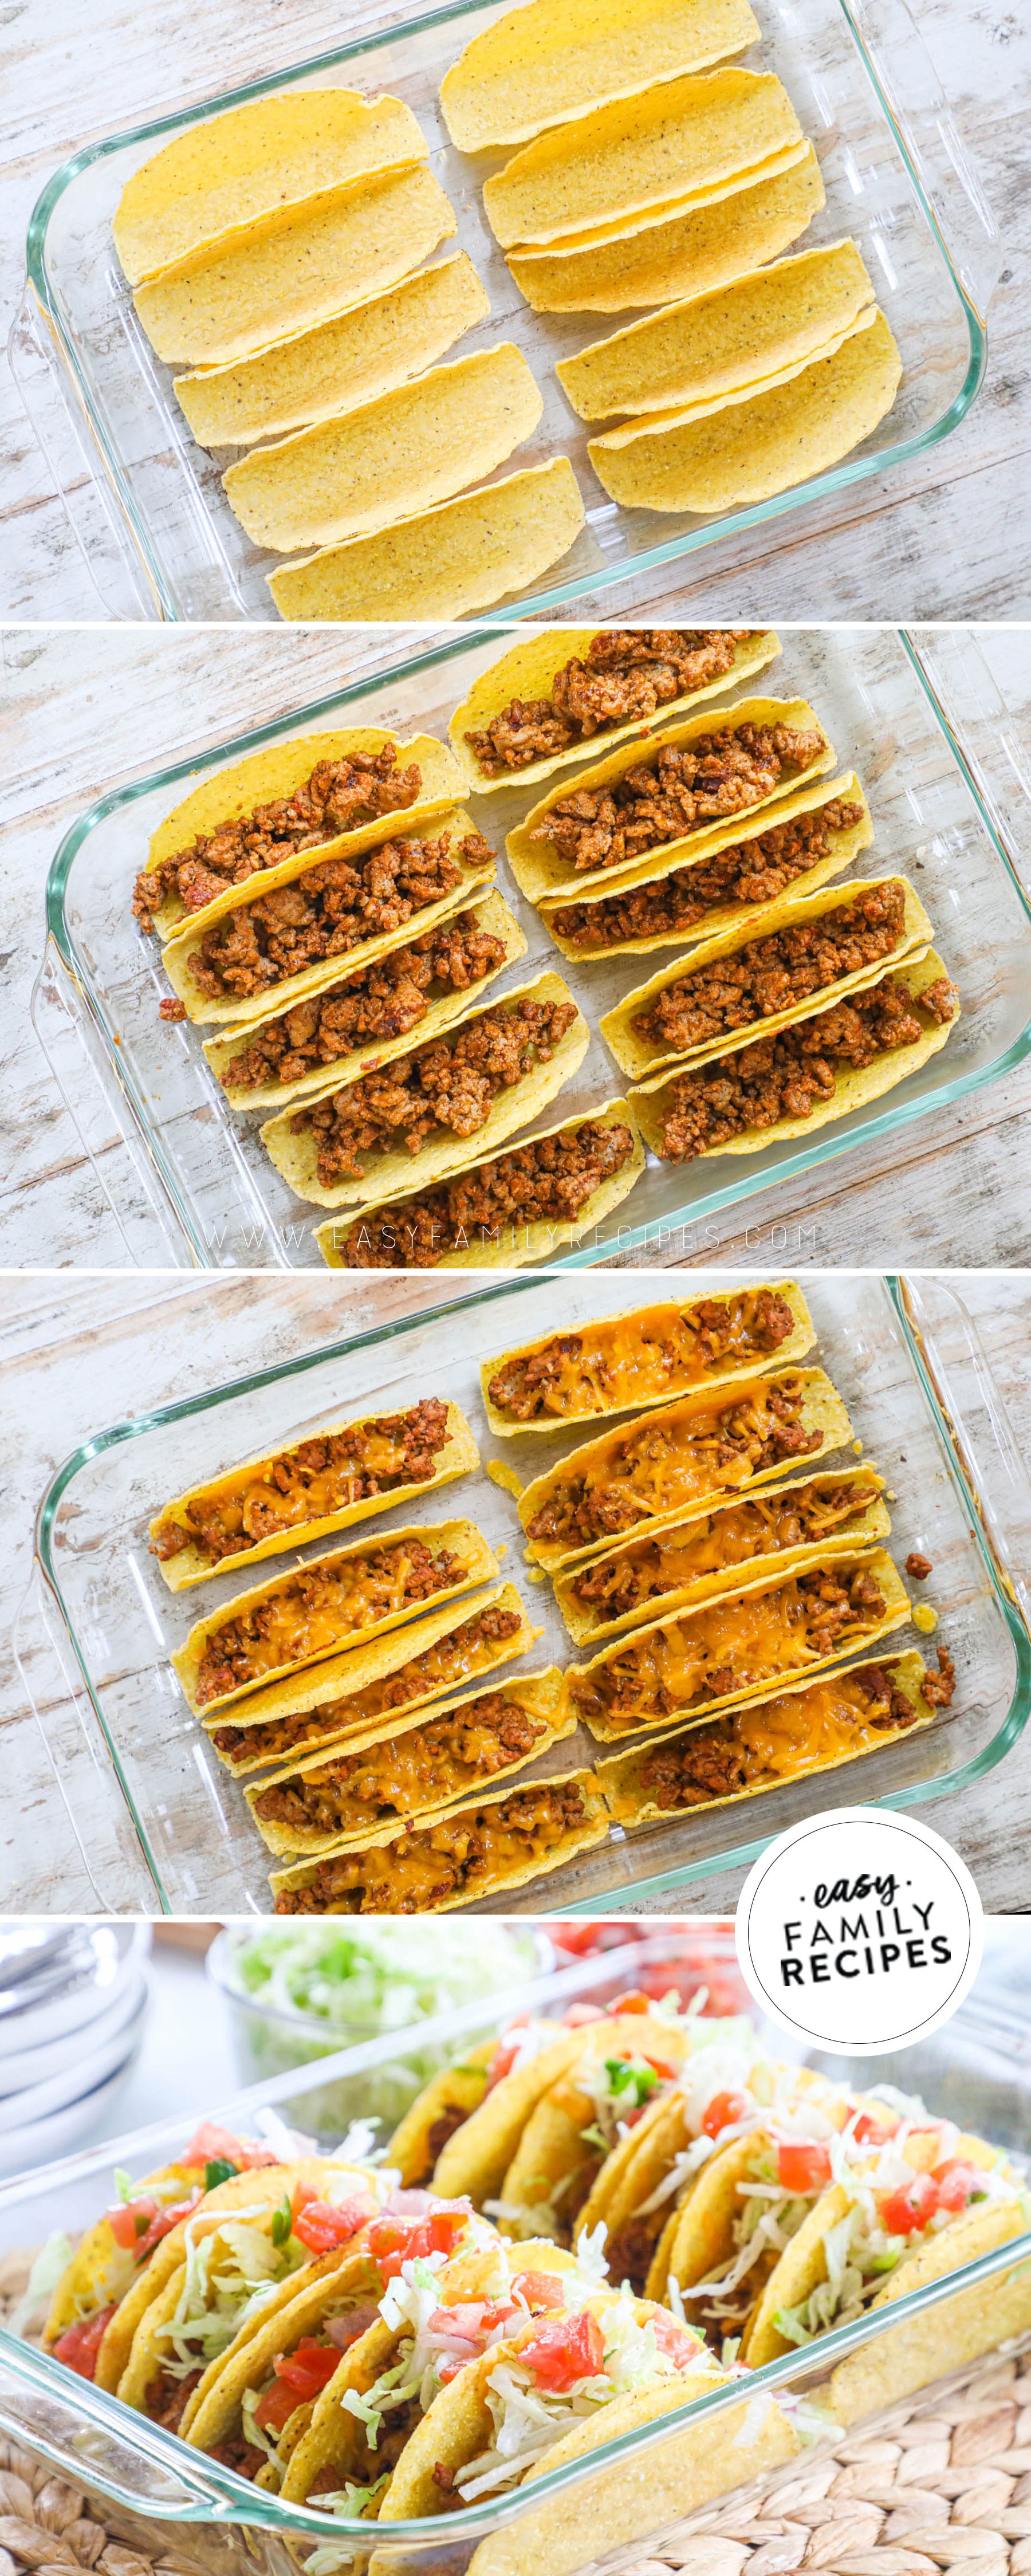 Steps to make ground turkey baked tacos step 1 make the filling step 2 fill the tacos with ground turkey step 3 top with cheese and bake step 4 enjoy with all any toppings you love like tomatoes and lettuce.